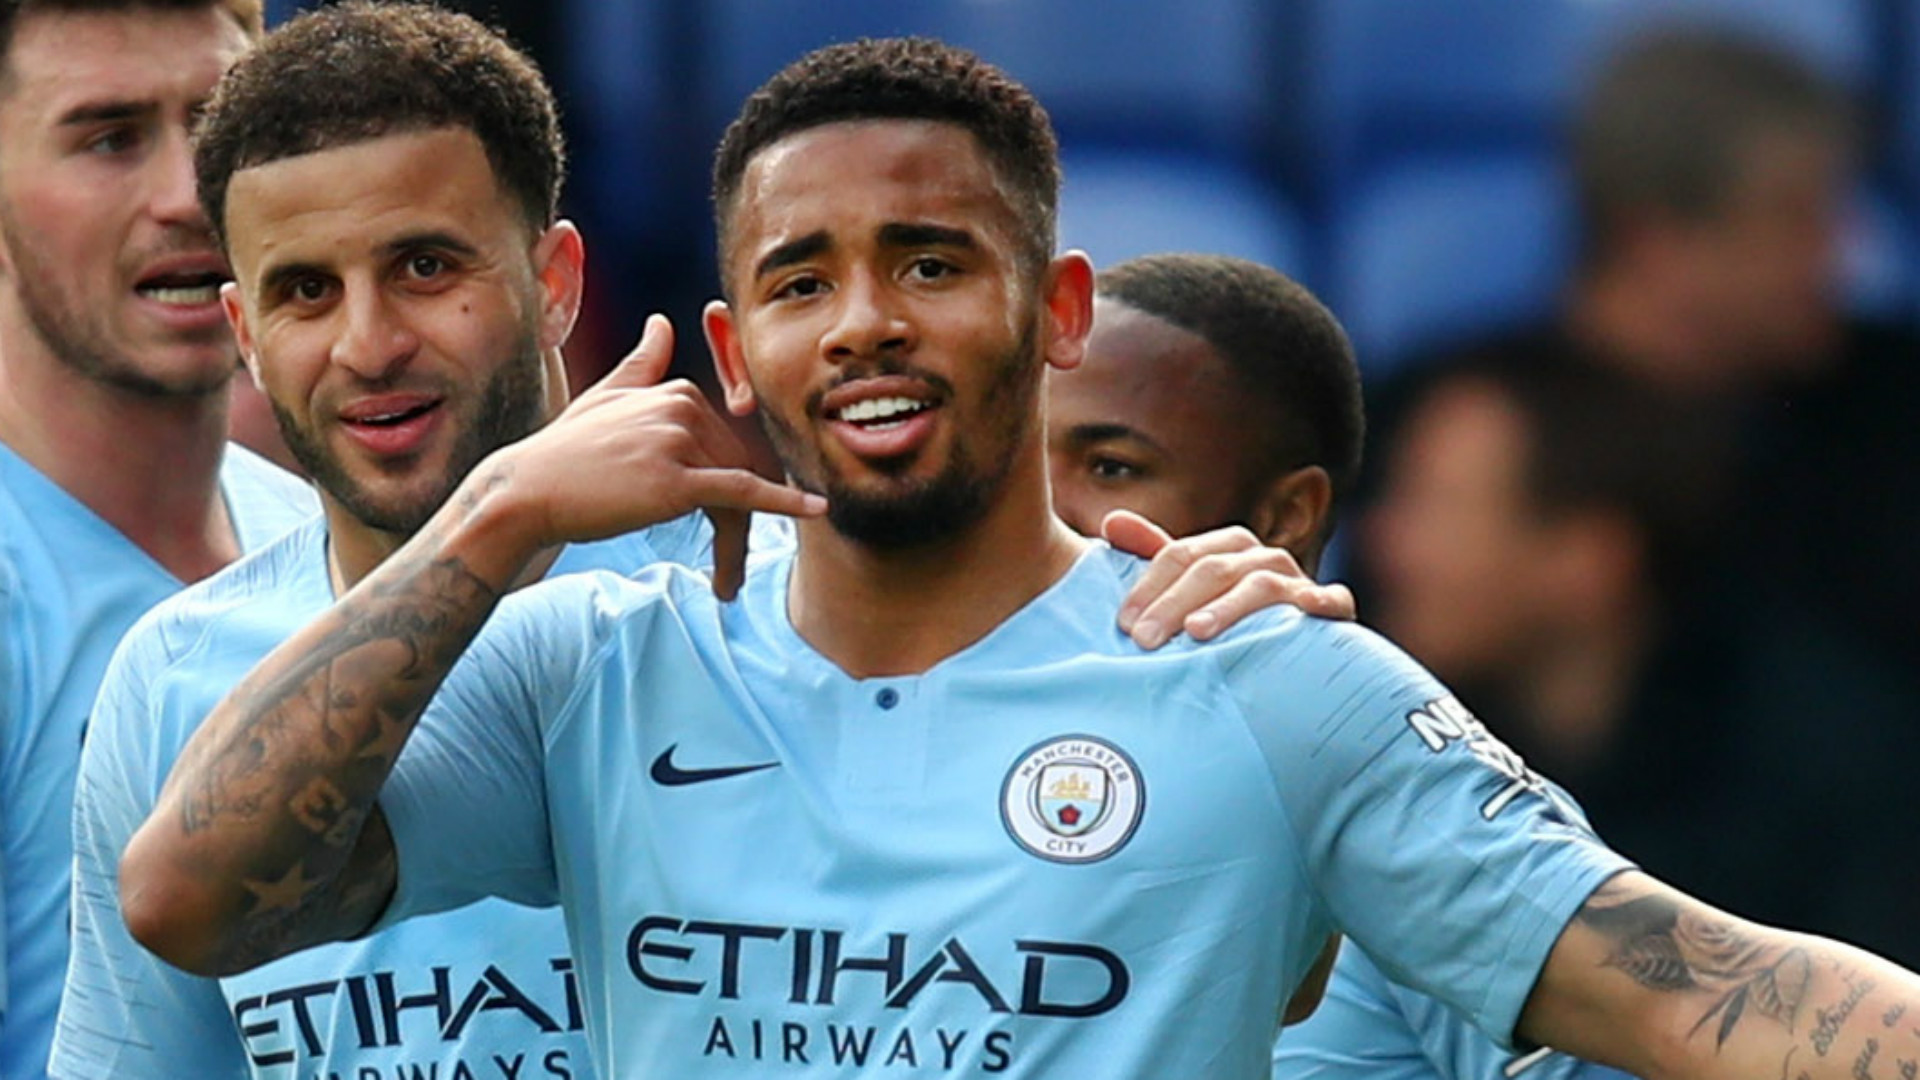 Man City Gabriel Jesus takes No.9 shirt with League champions to further dampen exit talk | Goal.com